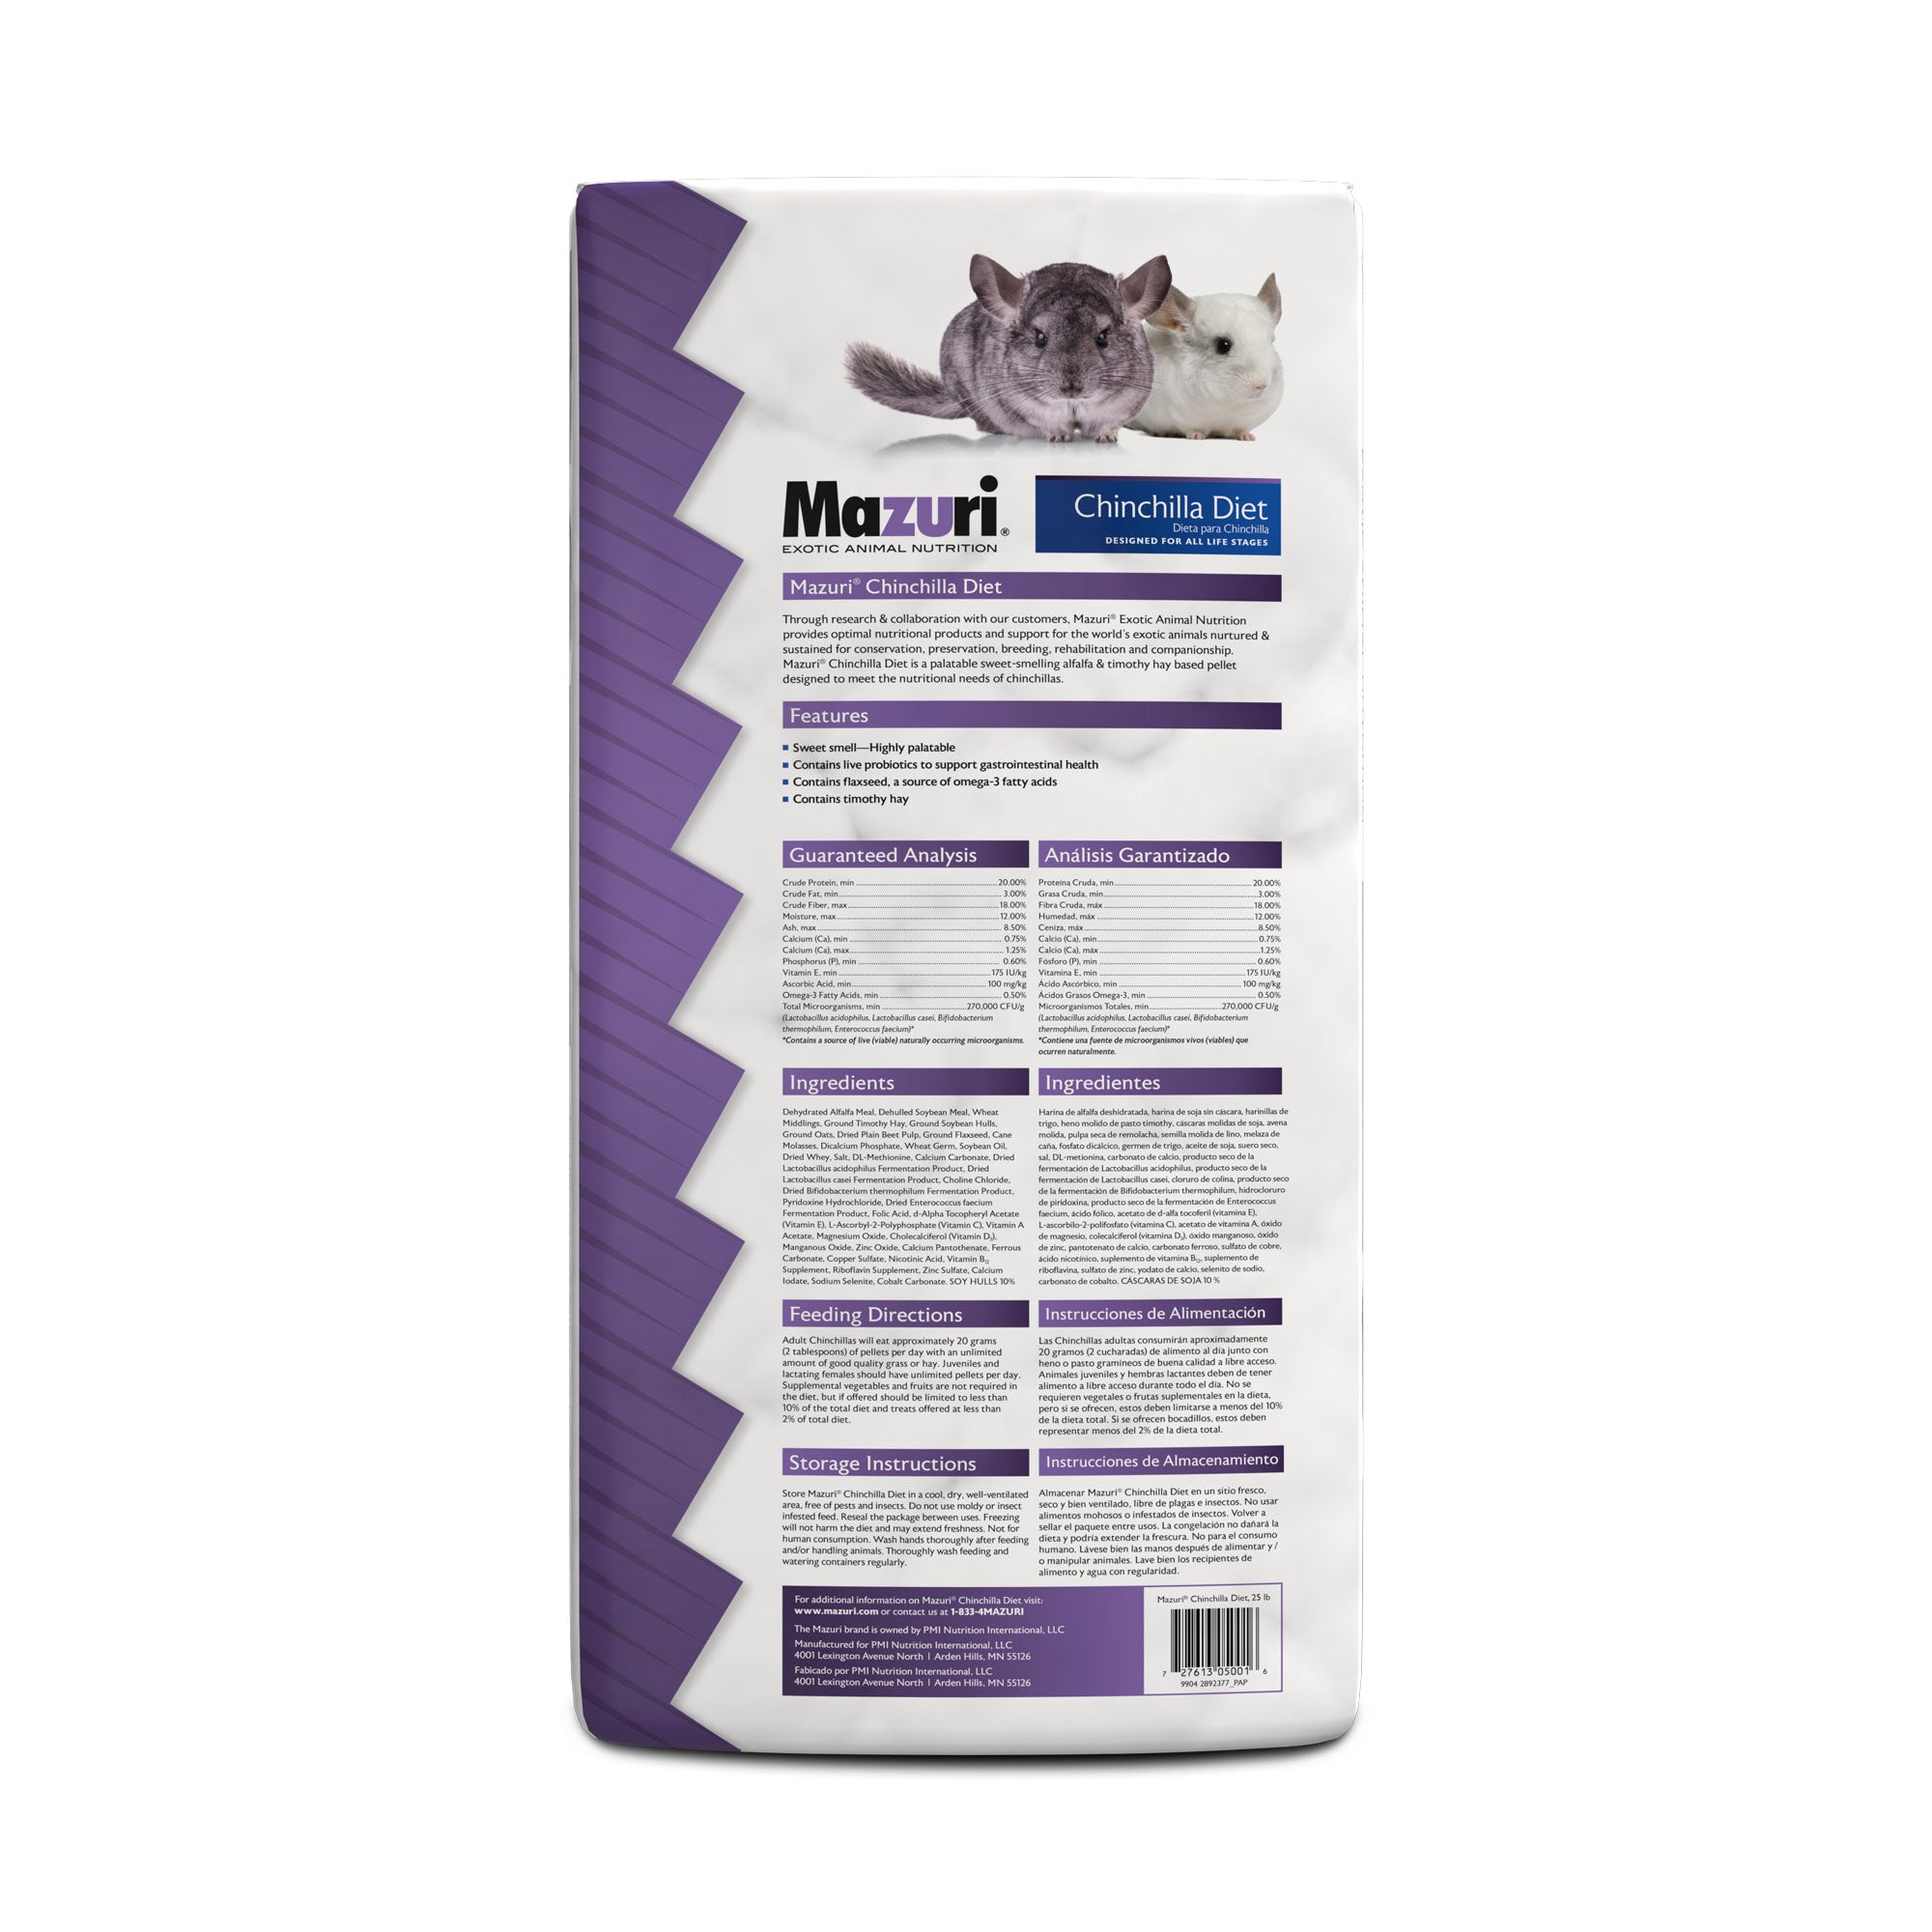 Chinchilla Diet 25 pound bag back with product information